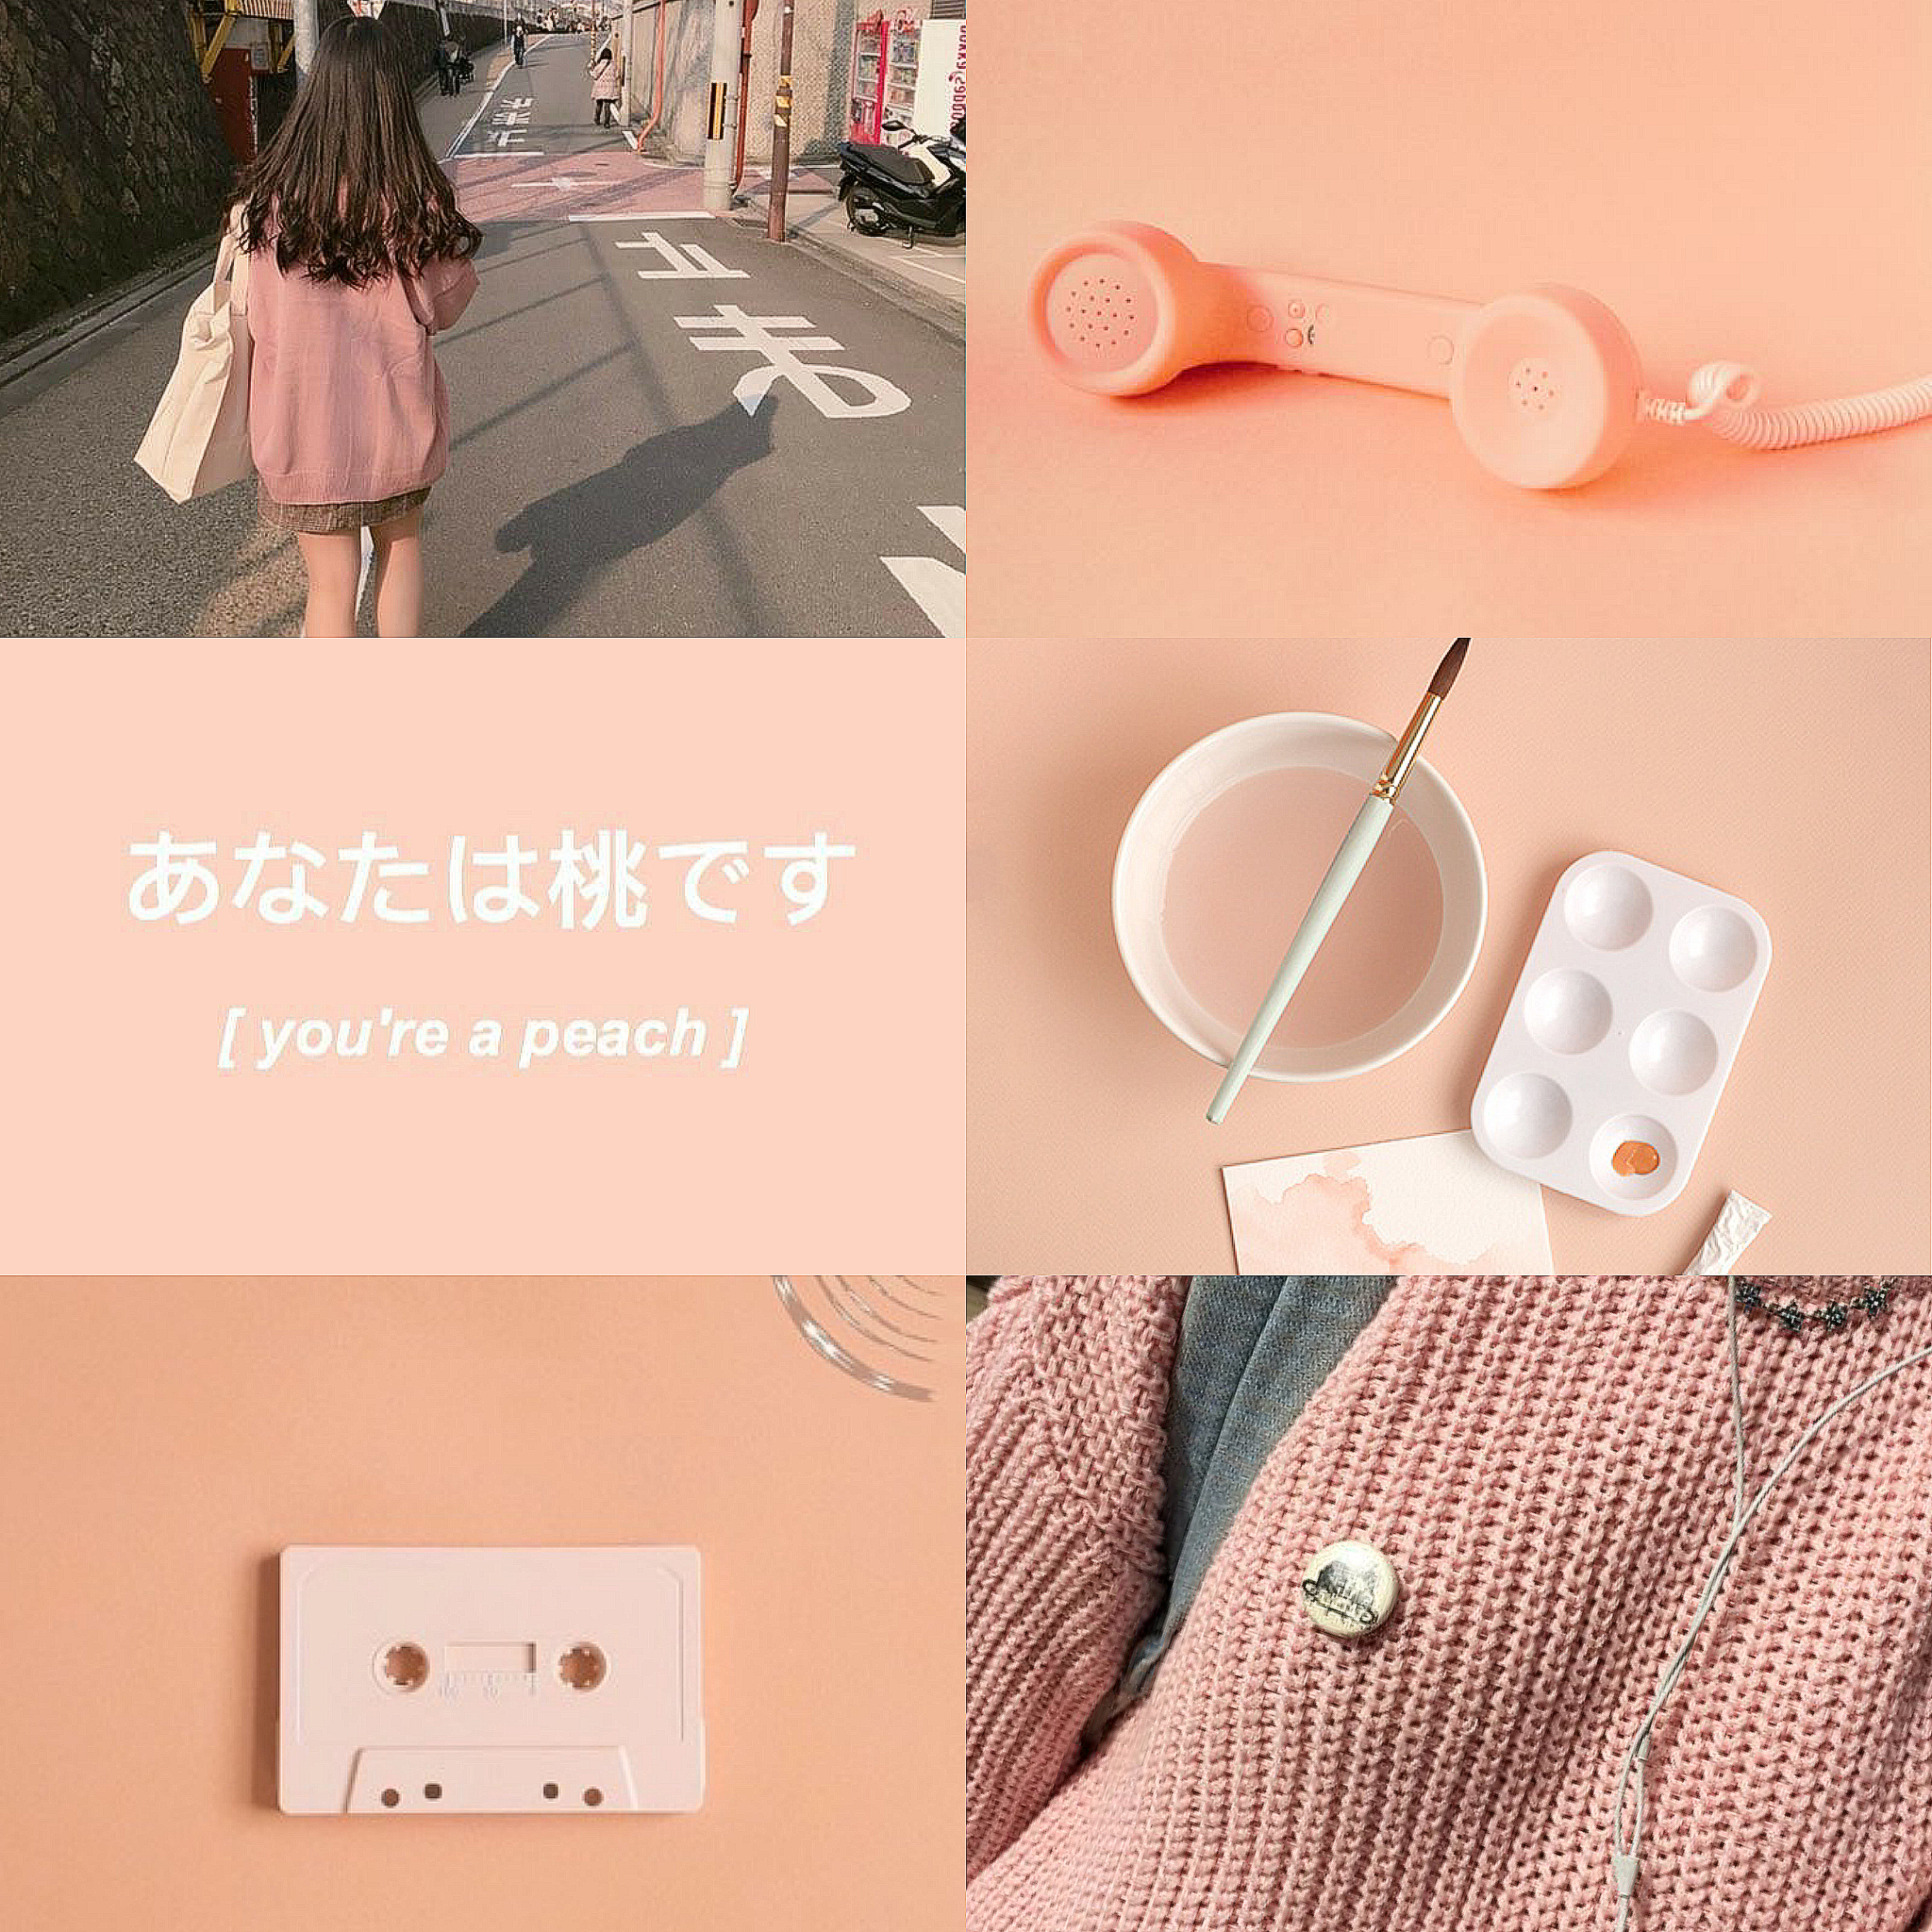 pink peach peachy aesthetic pastel #pink image by @badhyung.